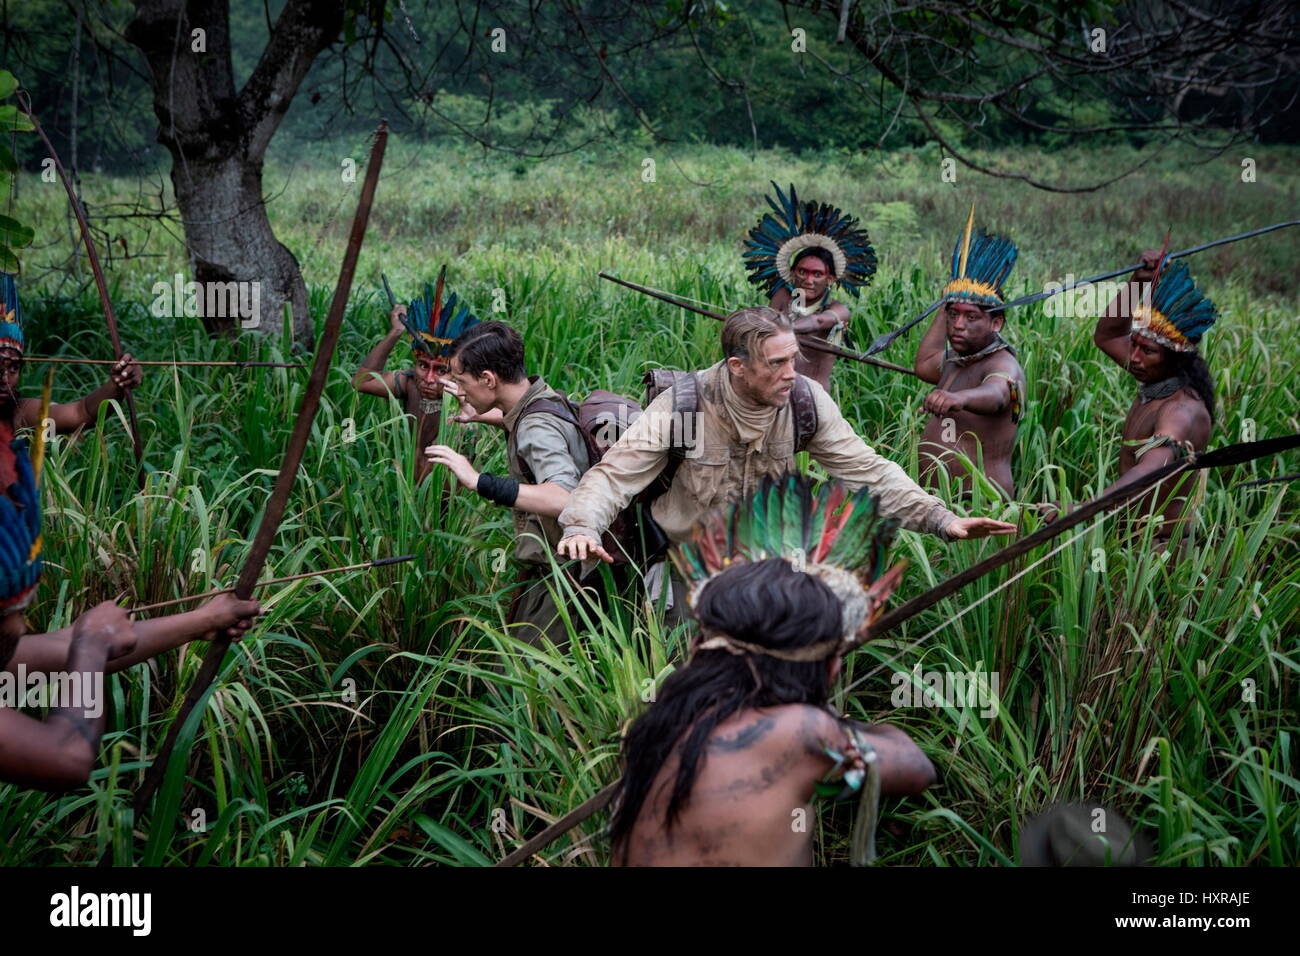 RELEASE DATE: April 14, 2017 TITLE: The Lost City Of Z STUDIO: Amazon Studios DIRECTOR: James Gray PLOT: A true-life drama, centering on British explorer Col. Percival Fawcett, who disappeared while searching for a mysterious city in the Amazon in the 1920s STARRING: Charlie Hunnam as Percy Fawcett (Credit: © Amazon Studios/Entertainment Pictures) Stock Photo